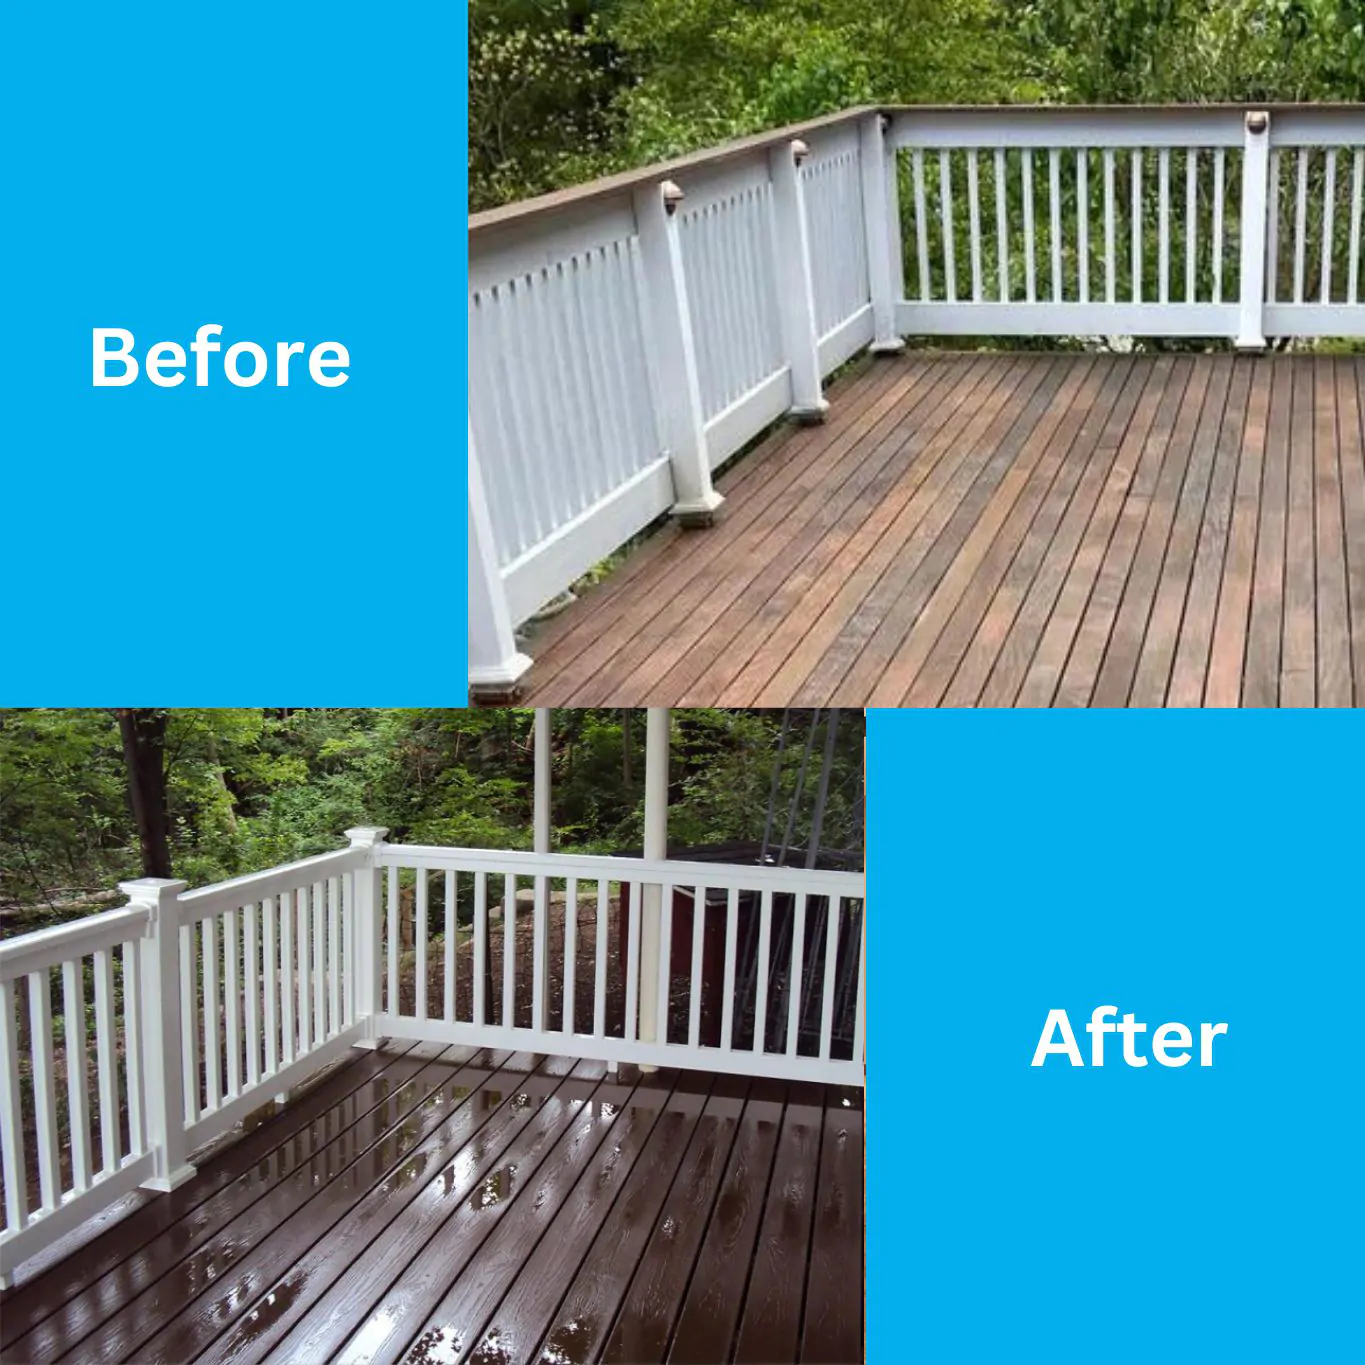 Before and After Deck Design Services - All Pro Cape May Deck Builders